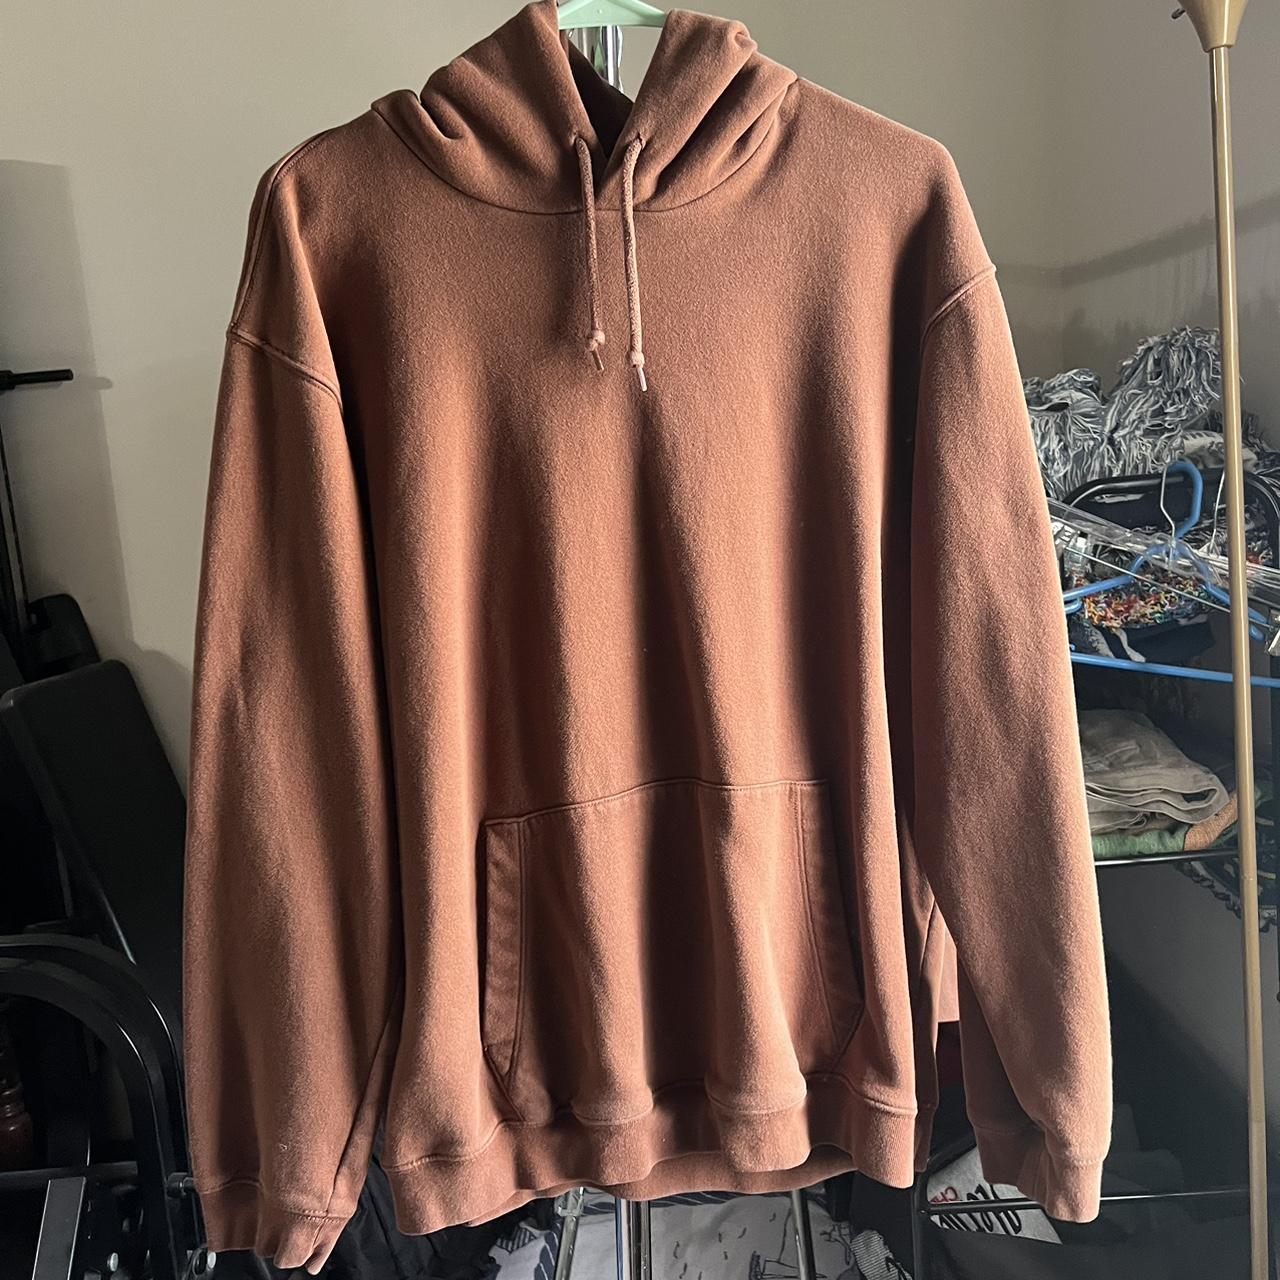 Blank Brown Hoodie Size L Pit to pit: 23” Top to - Depop